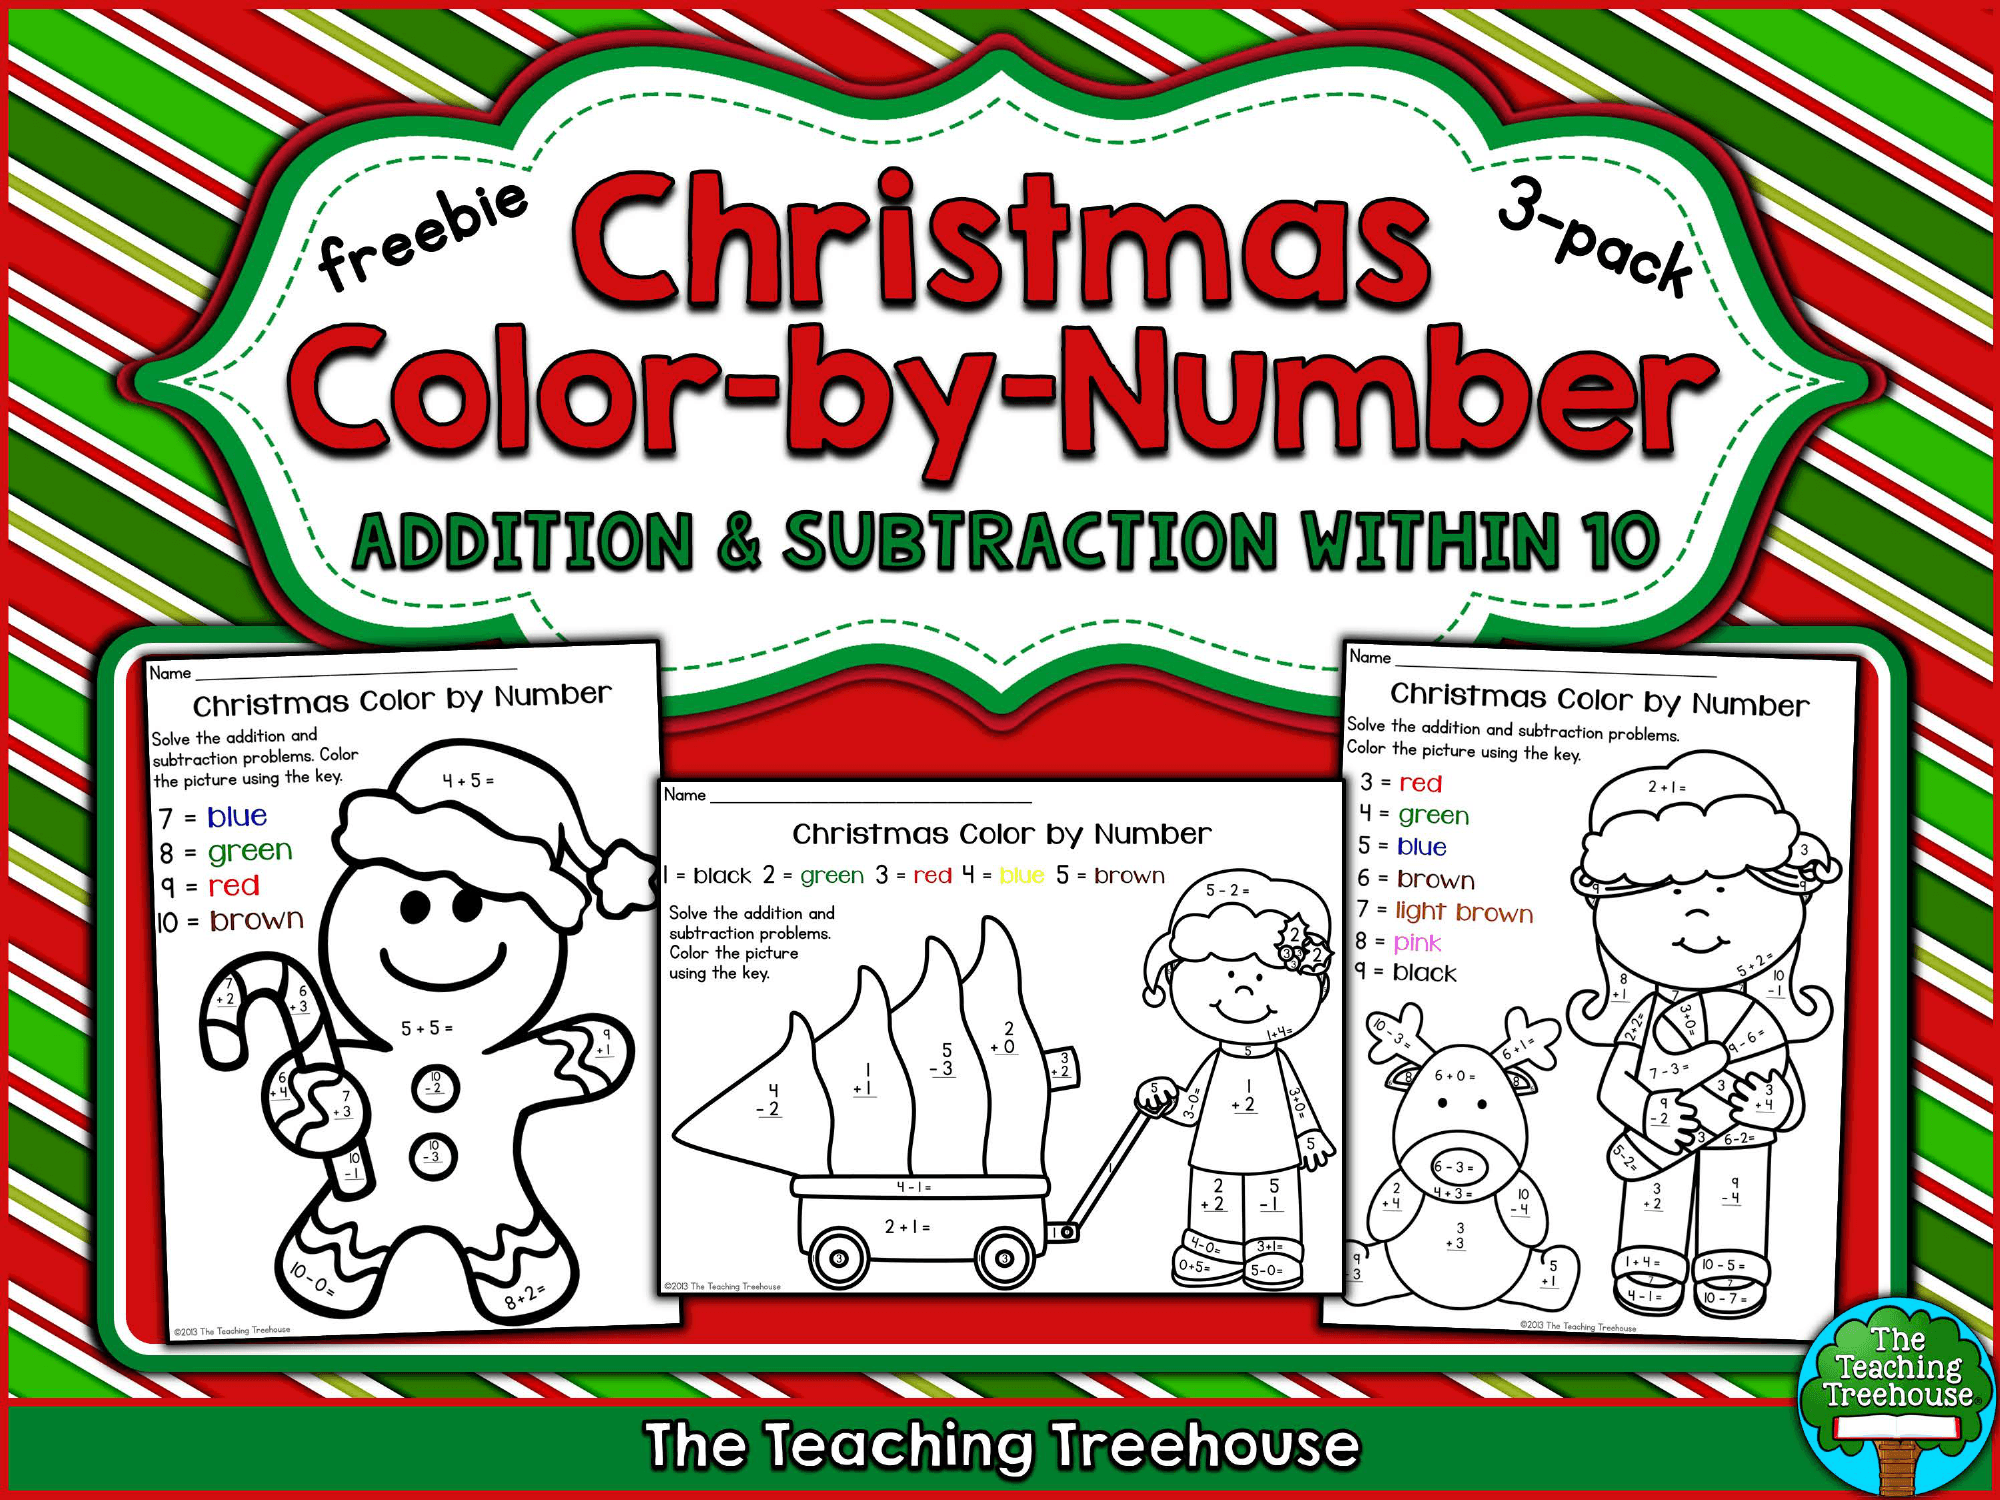 Christmas color by number